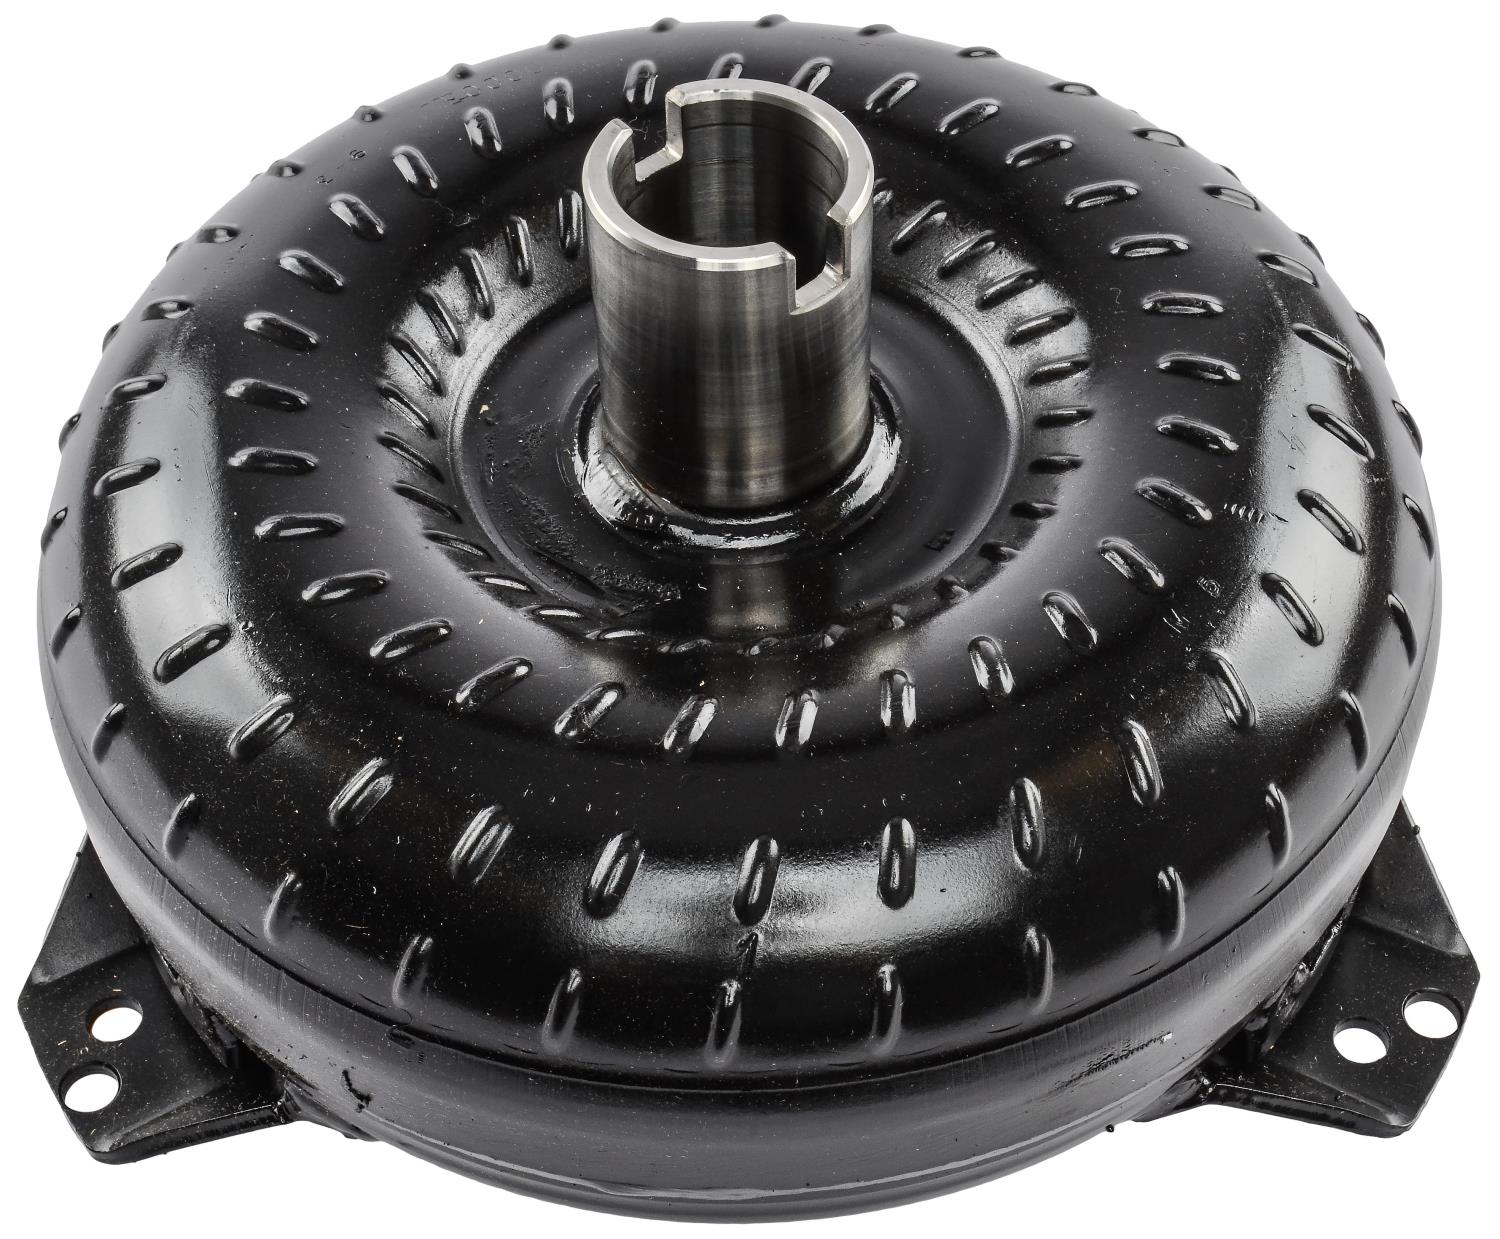 Torque Converter for GM TH350/TH400 [3100-3500 RPM Stall Speed]